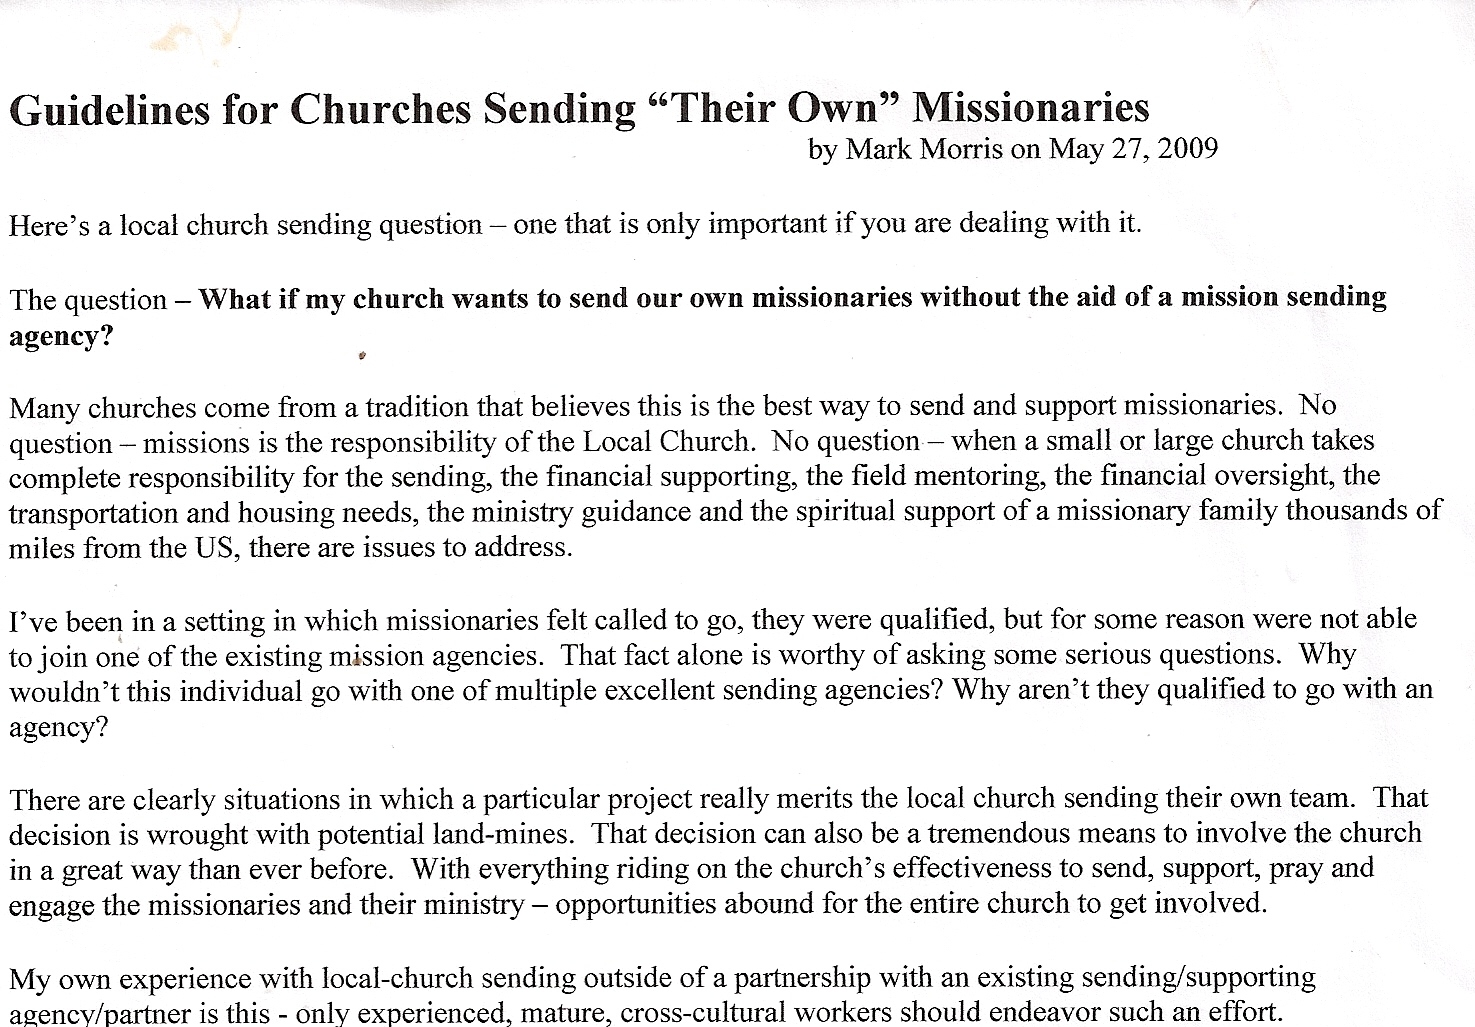 Guidelines for sending churches p1